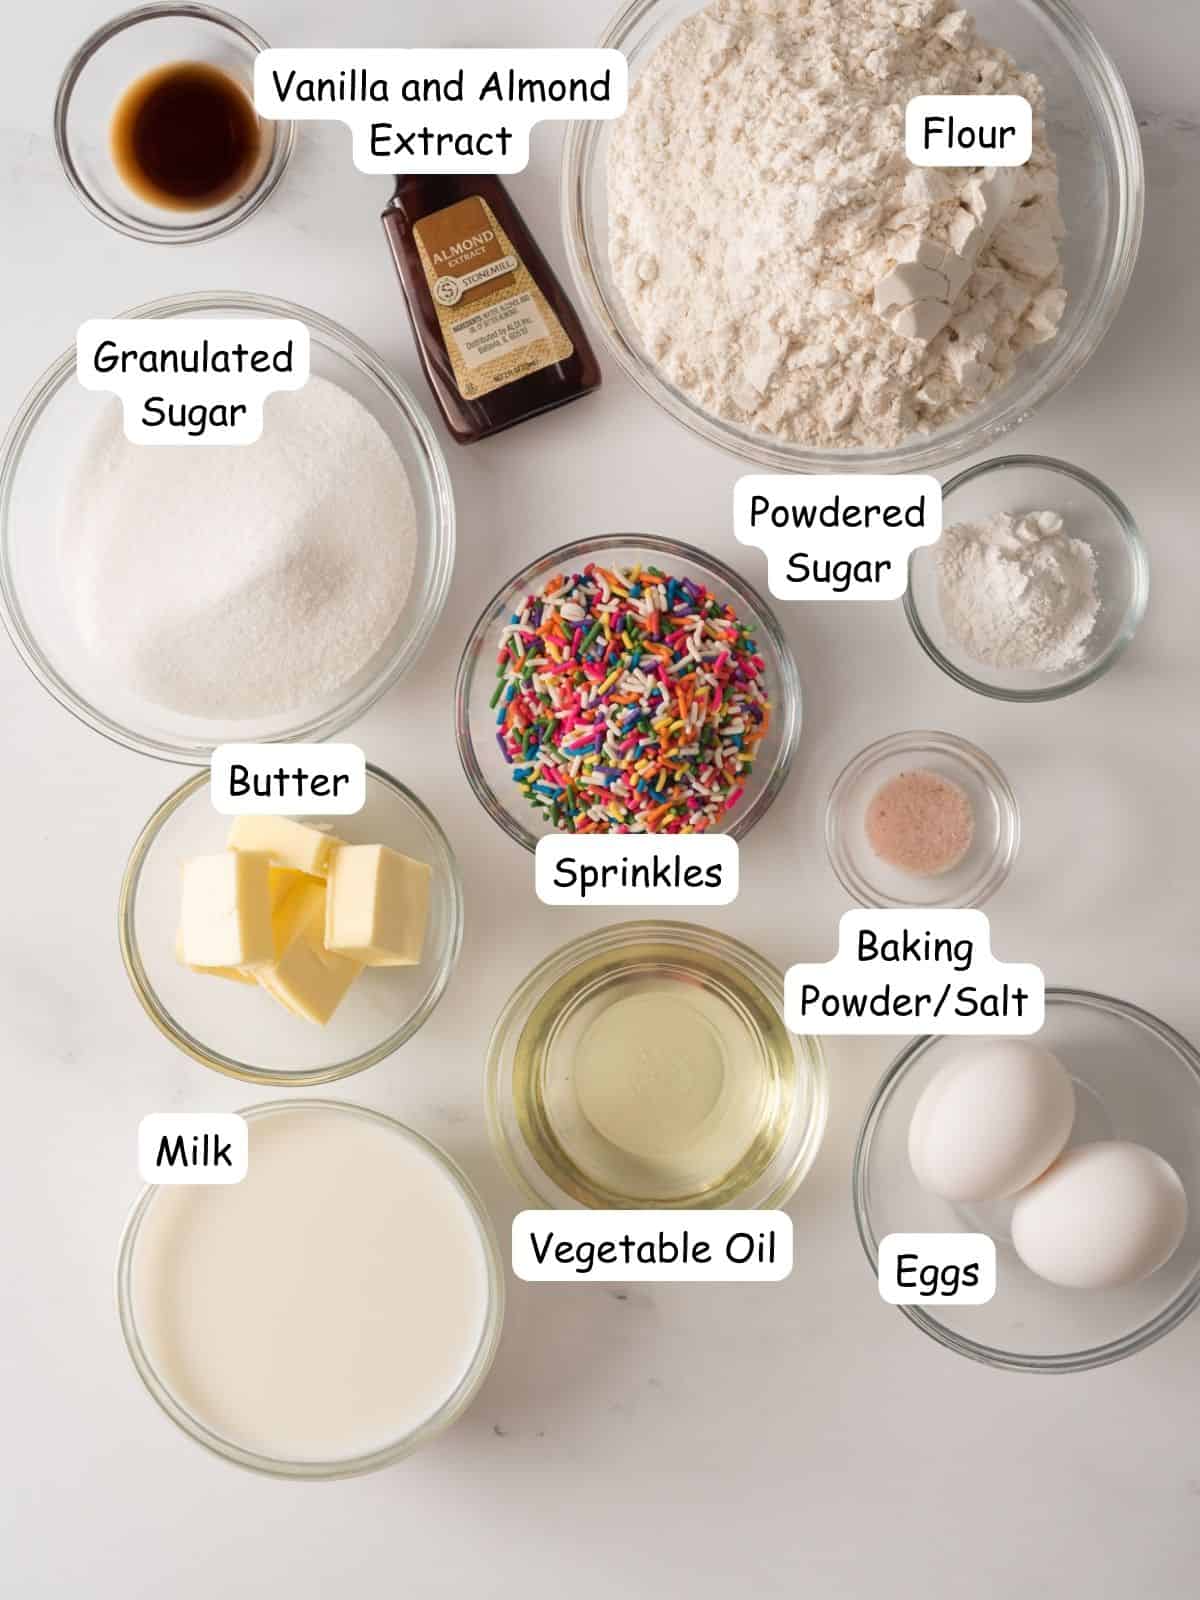 ingredients for homemade muffins with rainbow sprinkles.